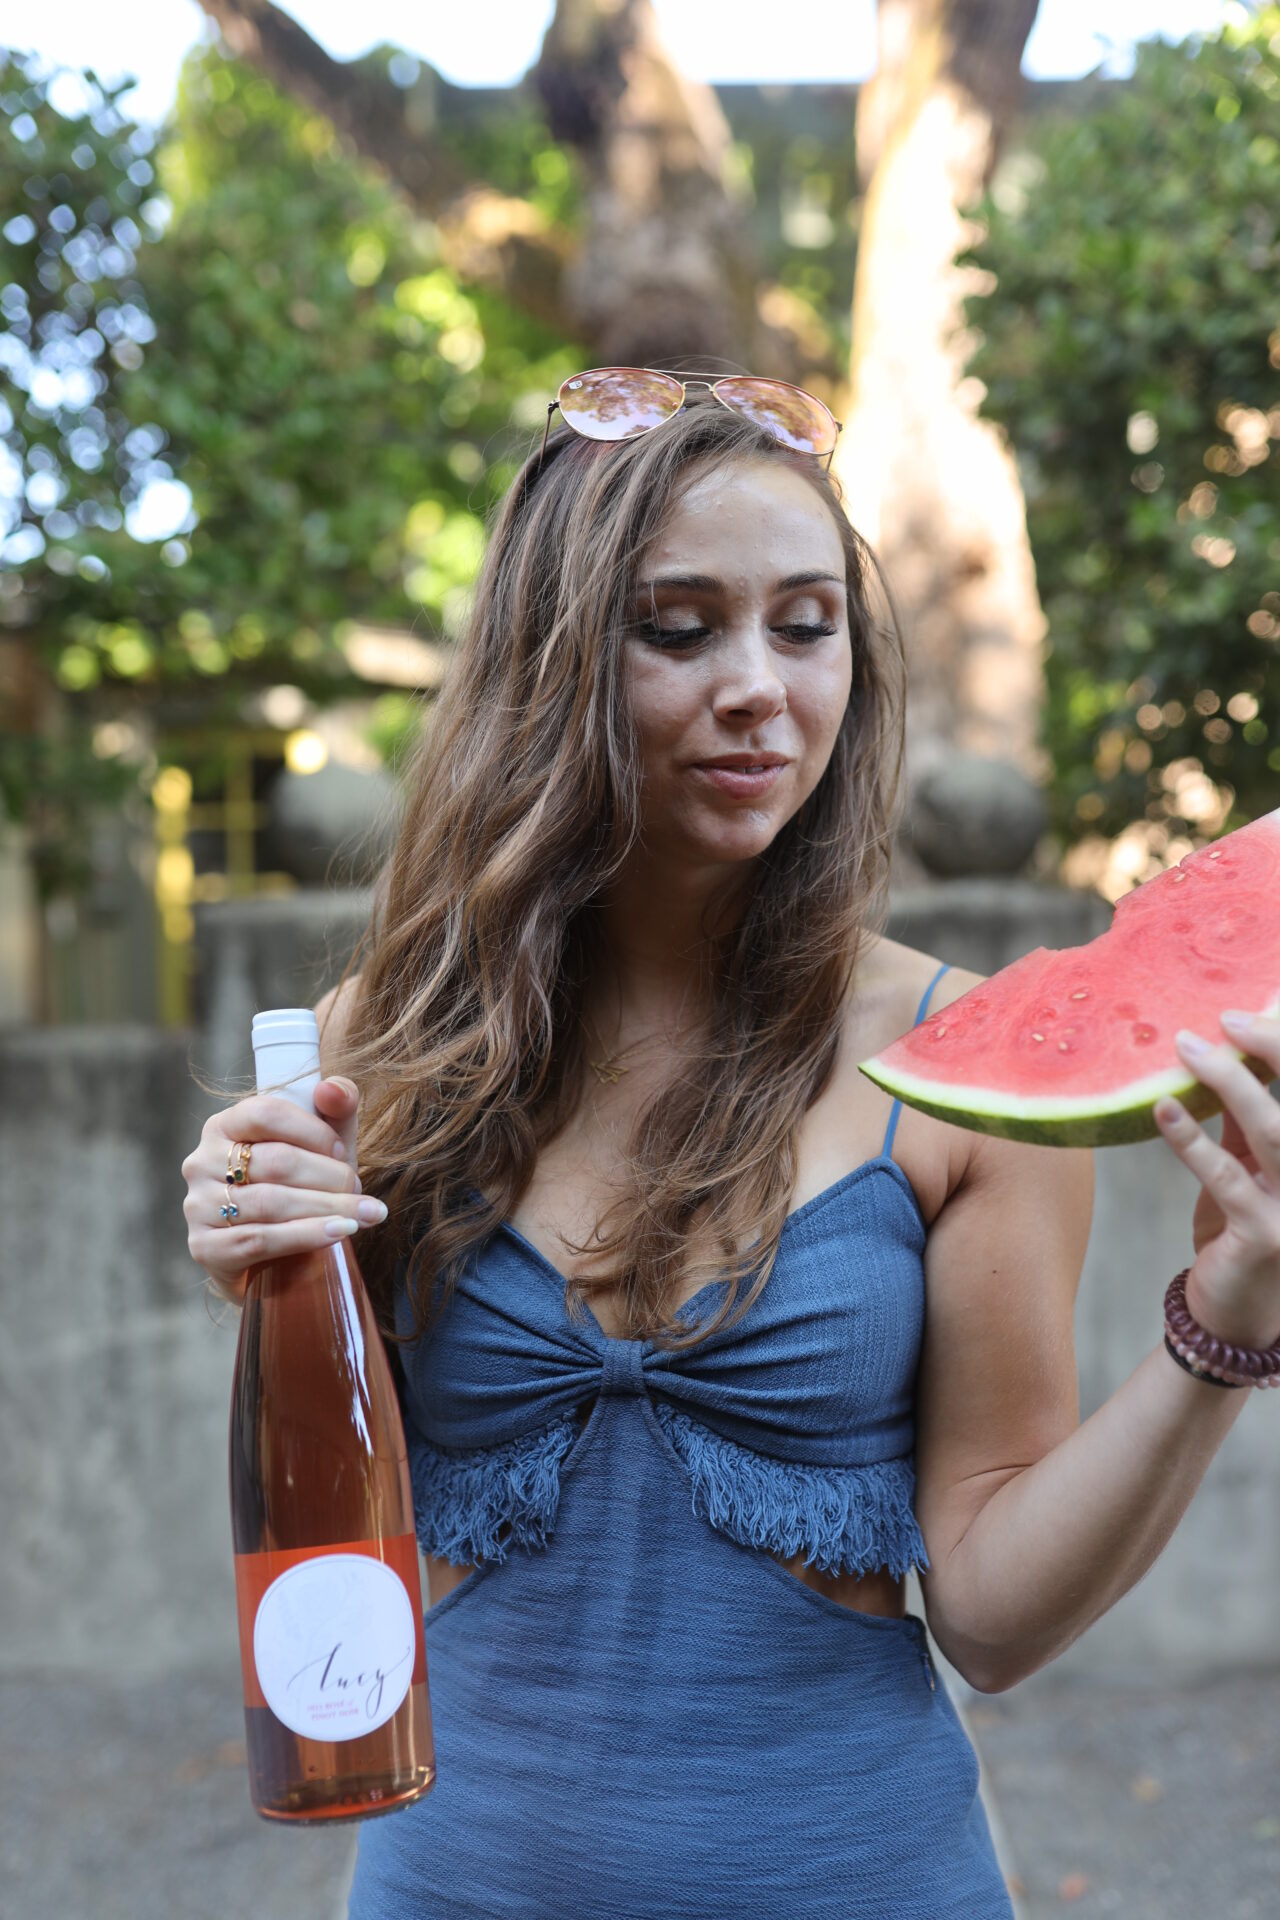 Paige eating watermelon and drinking rose outside during the summer in a blue dress